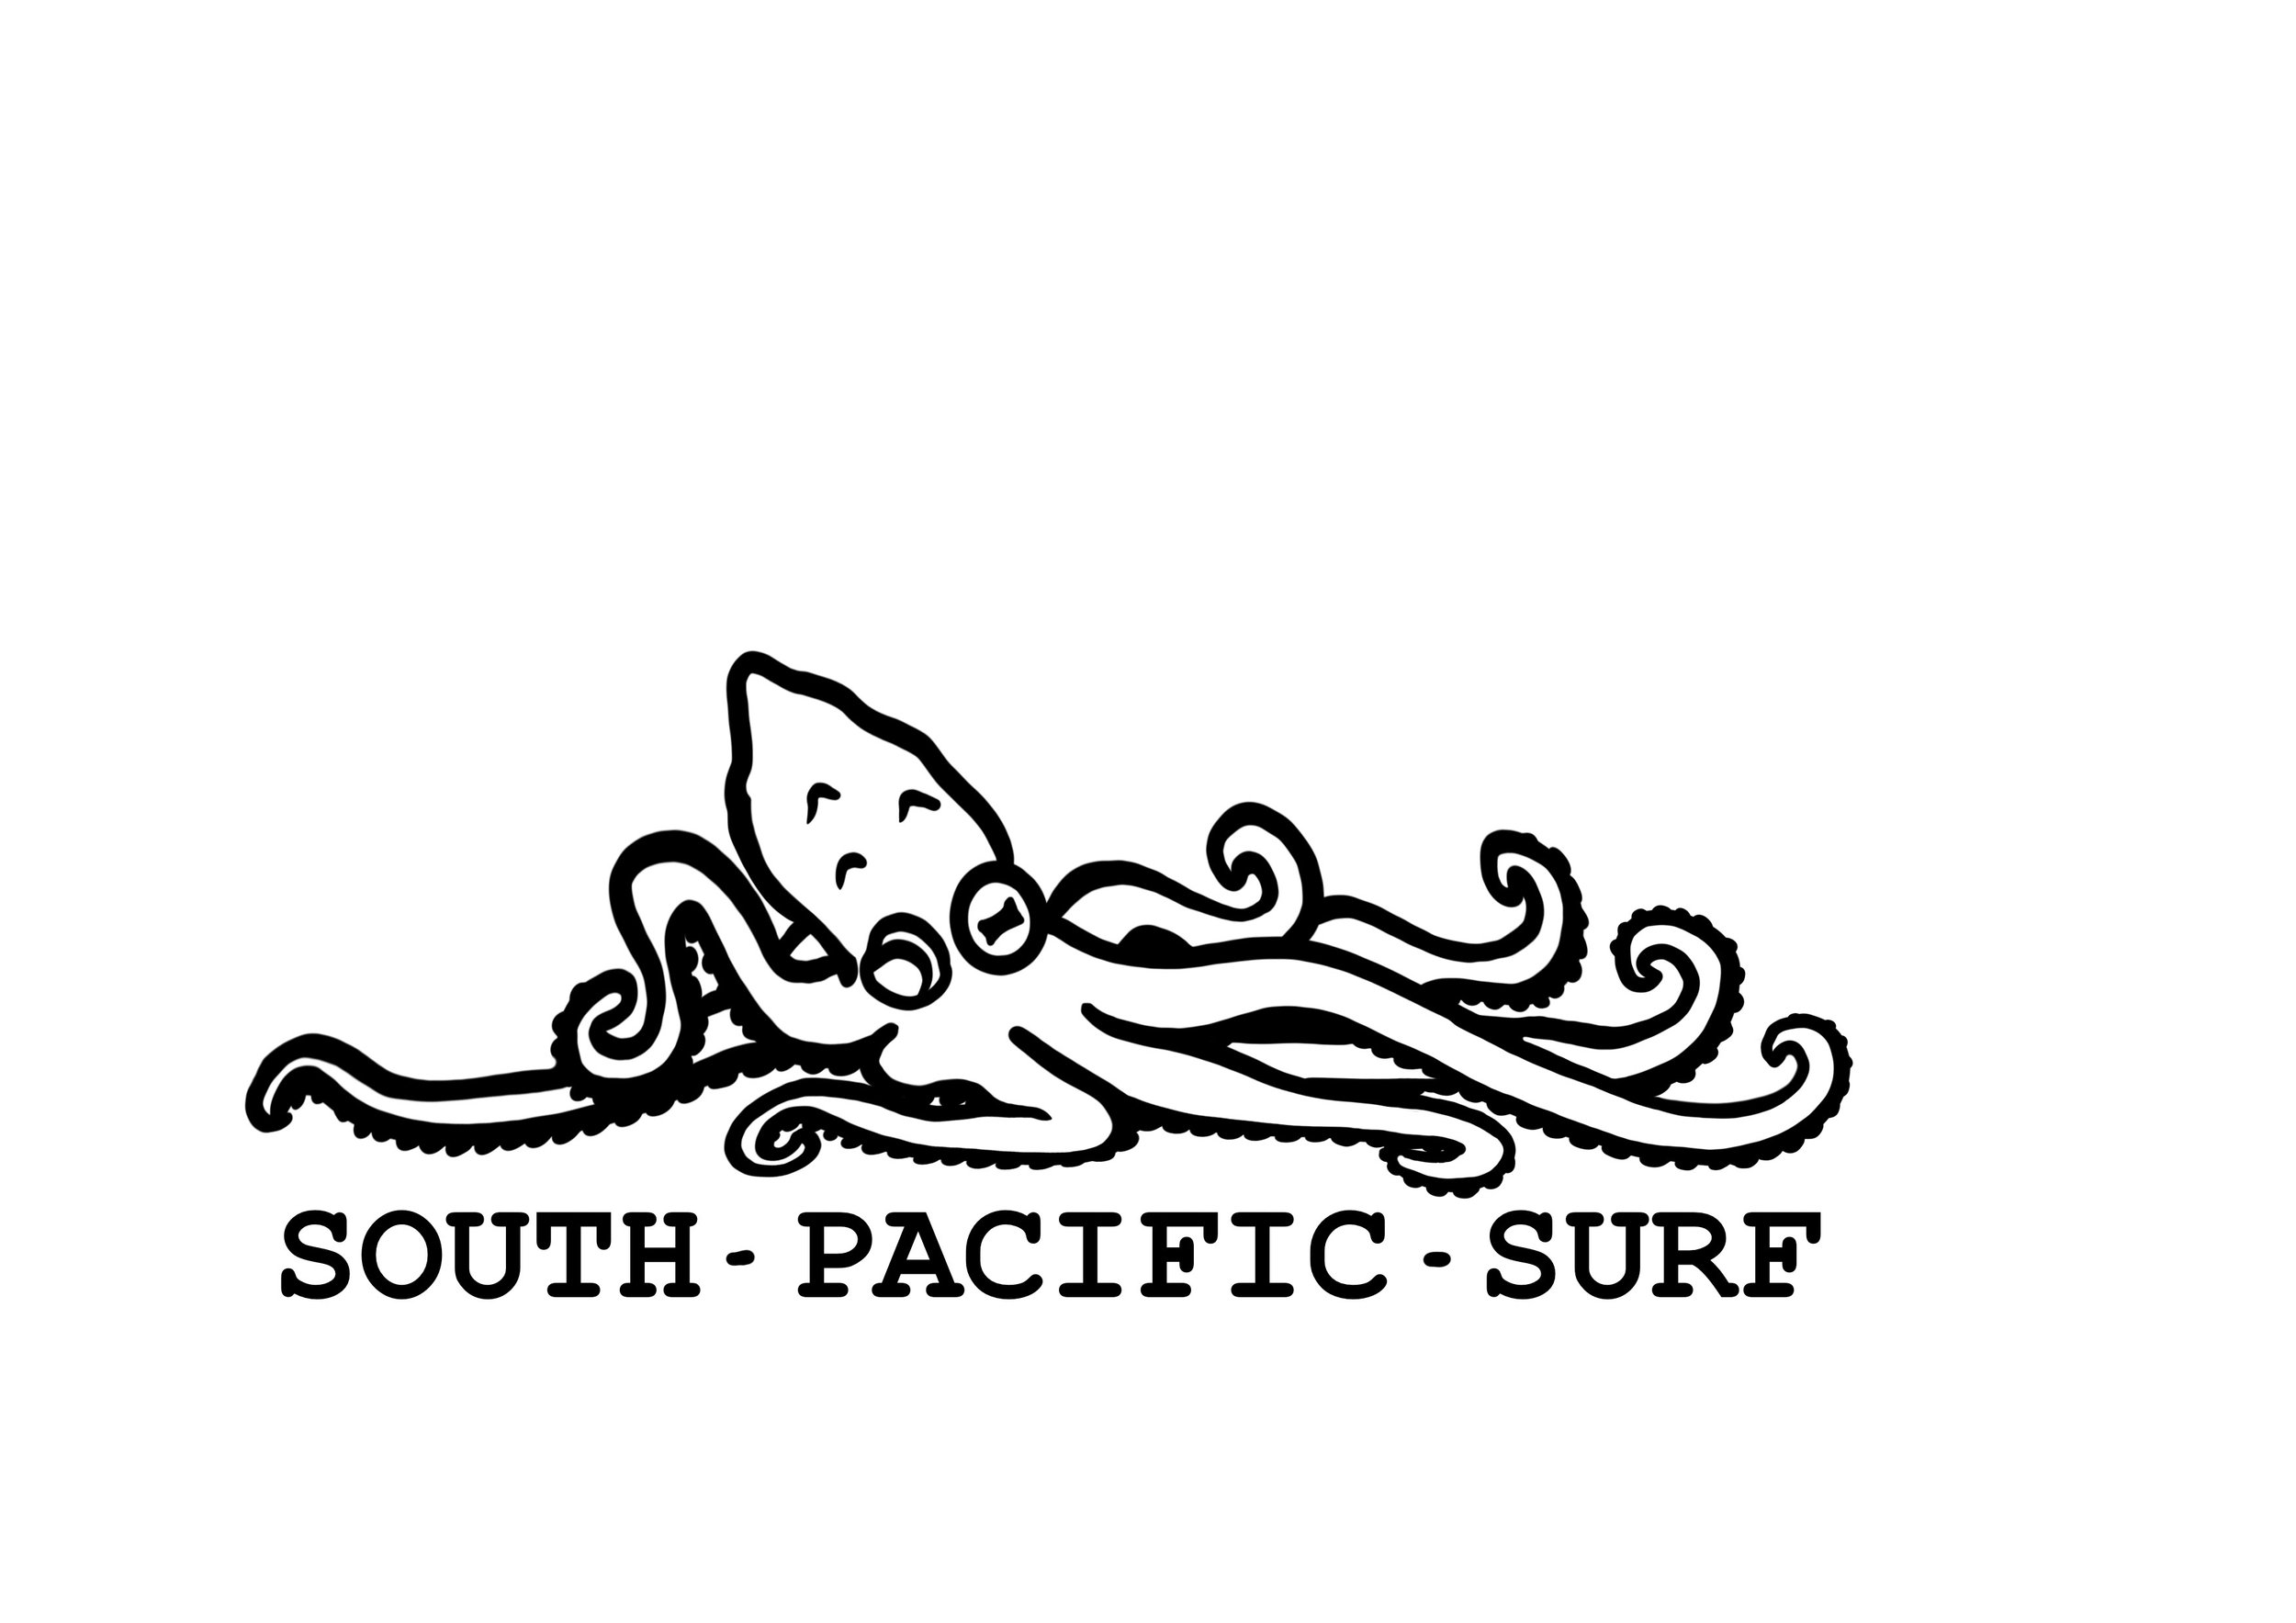 South Pacific Surf - logo